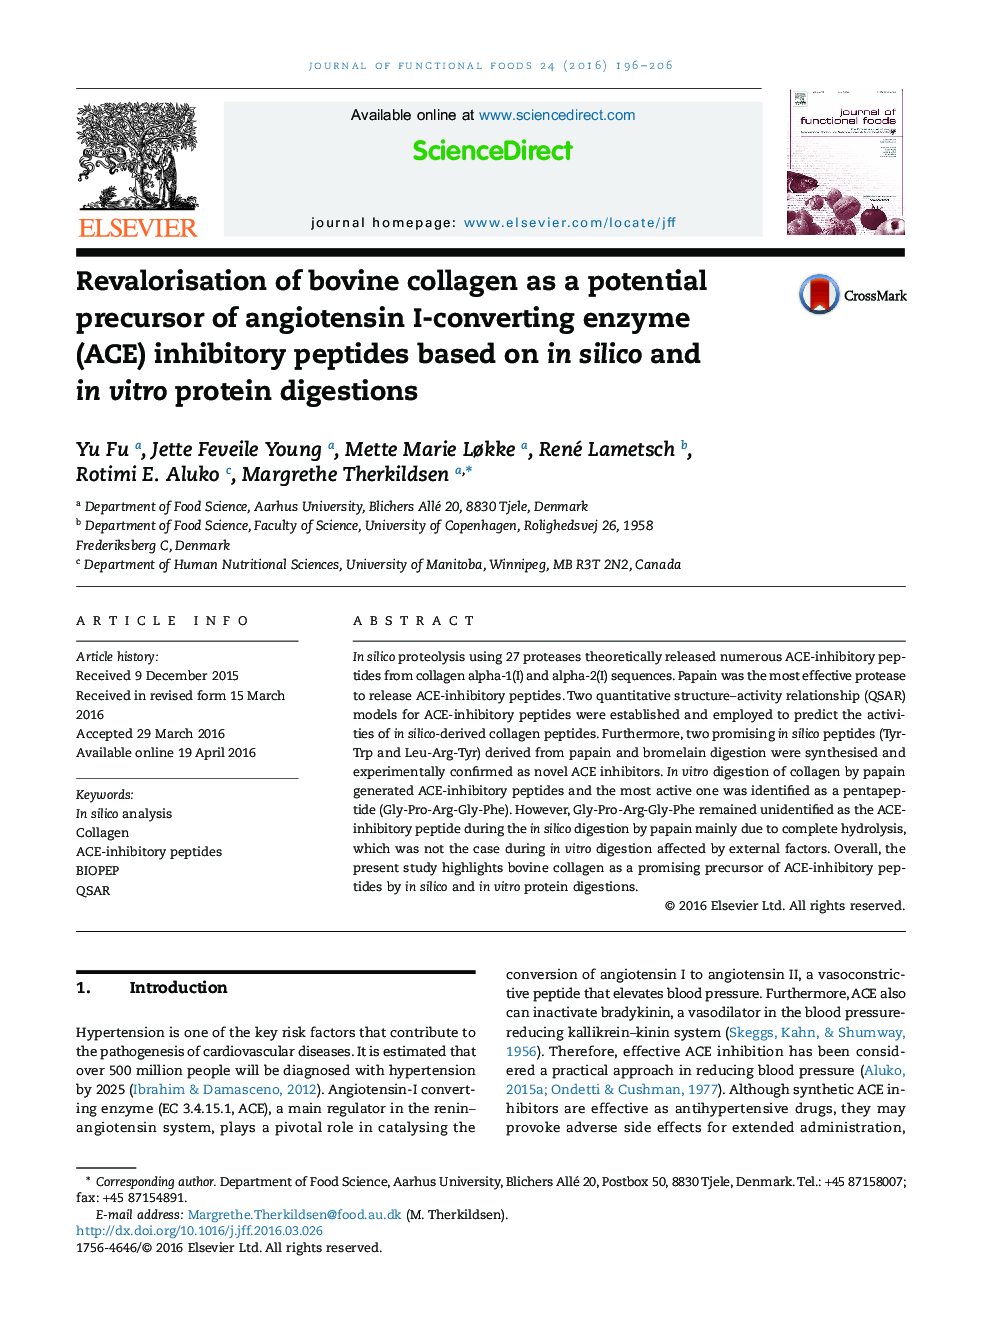 Revalorisation of bovine collagen as a potential precursor of angiotensin I-converting enzyme (ACE) inhibitory peptides based on in silico and in vitro protein digestions